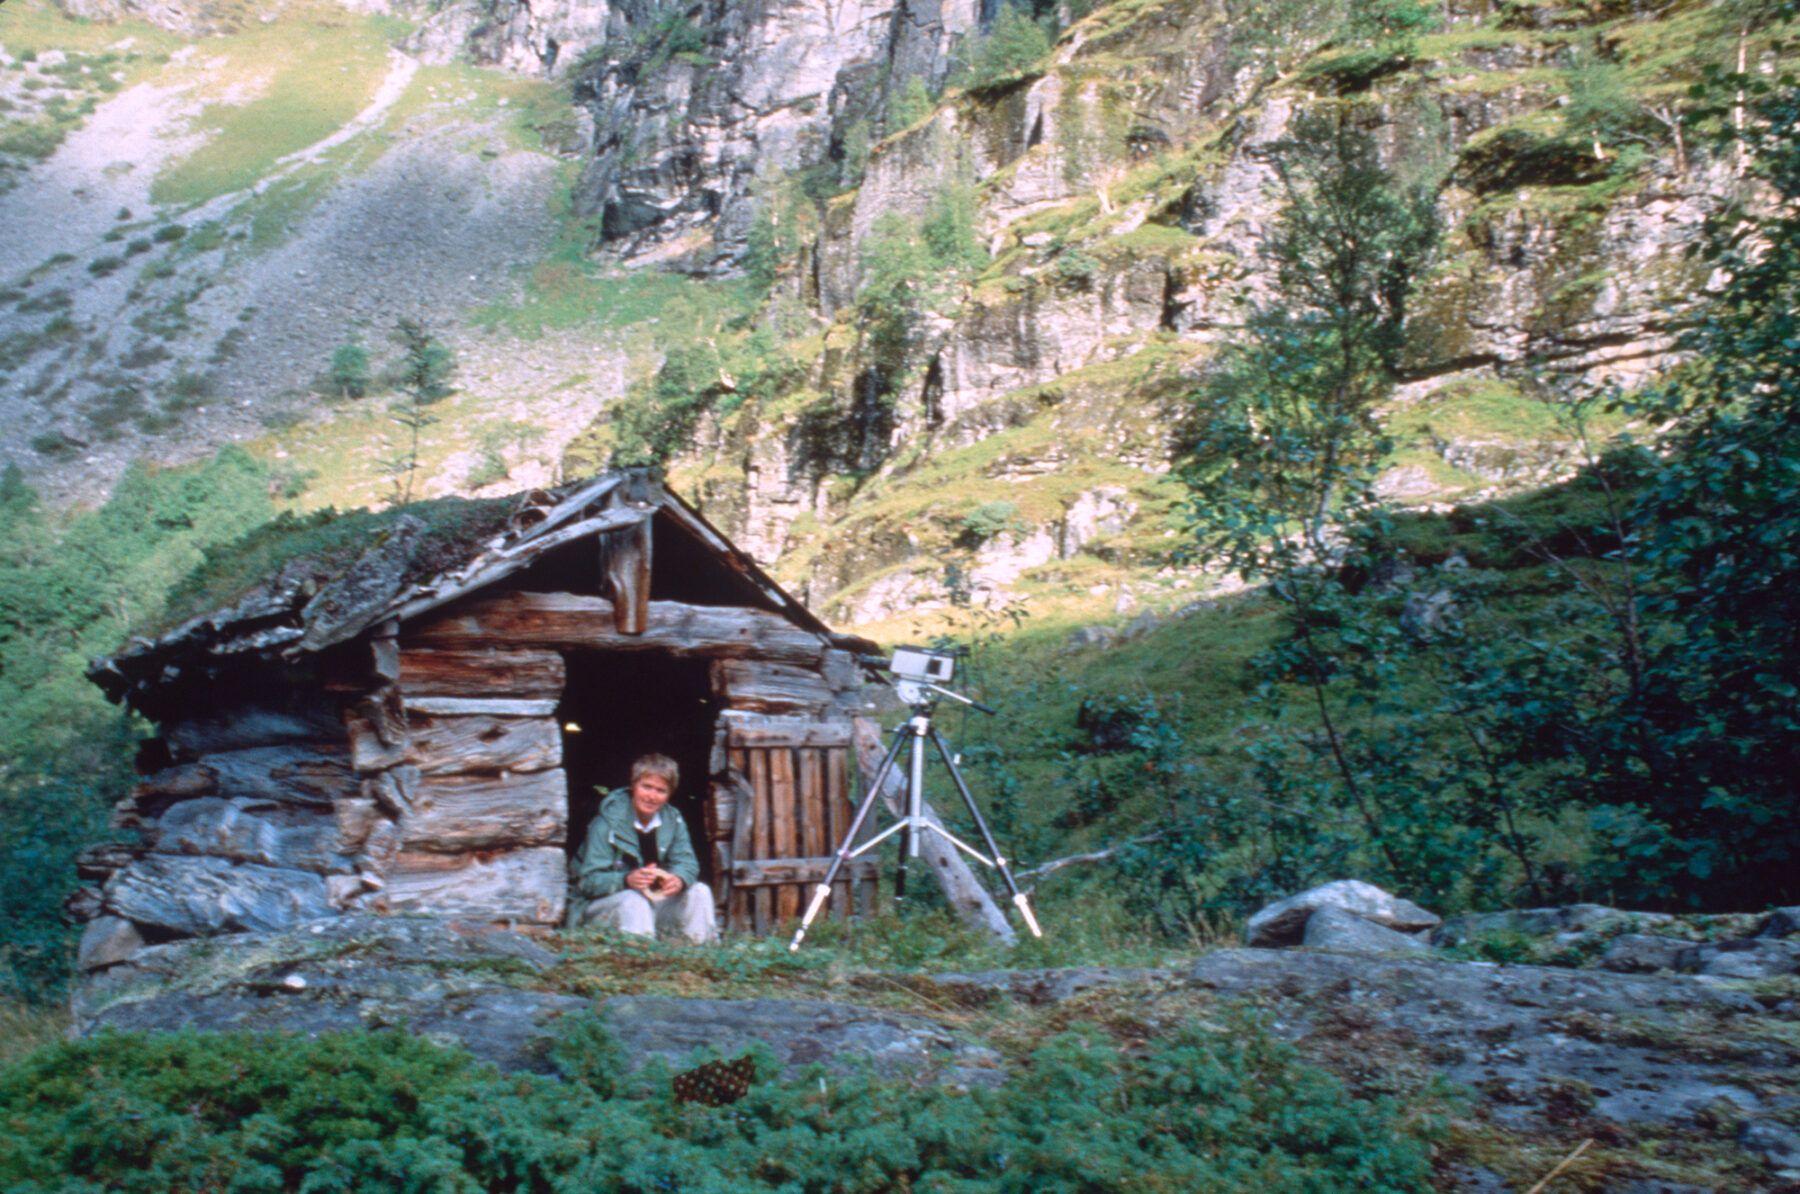 Marianne Heske with the hut in its natural surroundings in Tafjord